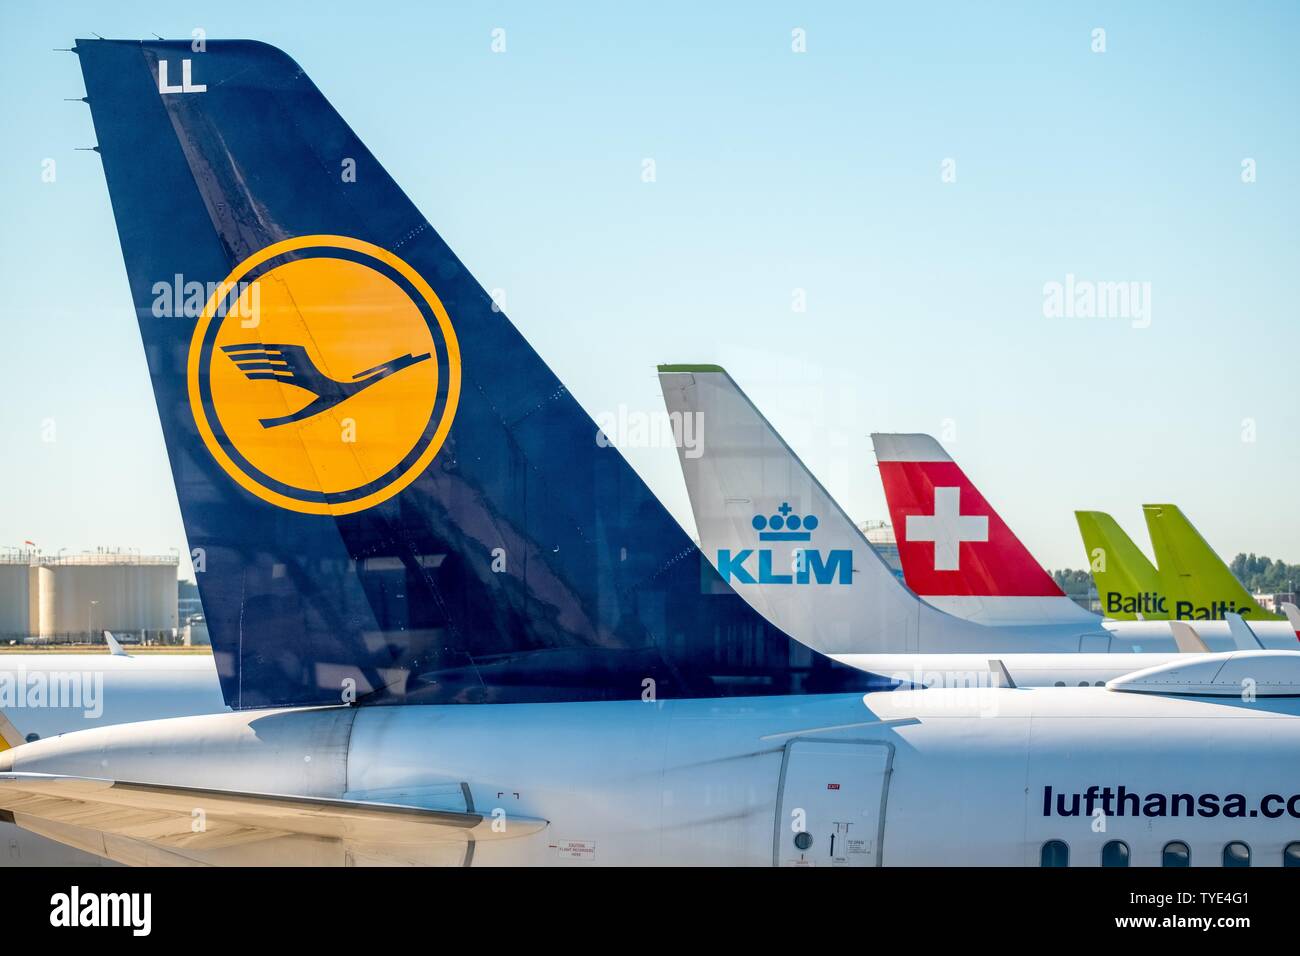 Rear tail fins with Lufthansa, KLM, Swiss Air and Baltic Air logo, Amsterdam Schiphol Airport, Noord-Holland, Netherlands Stock Photo